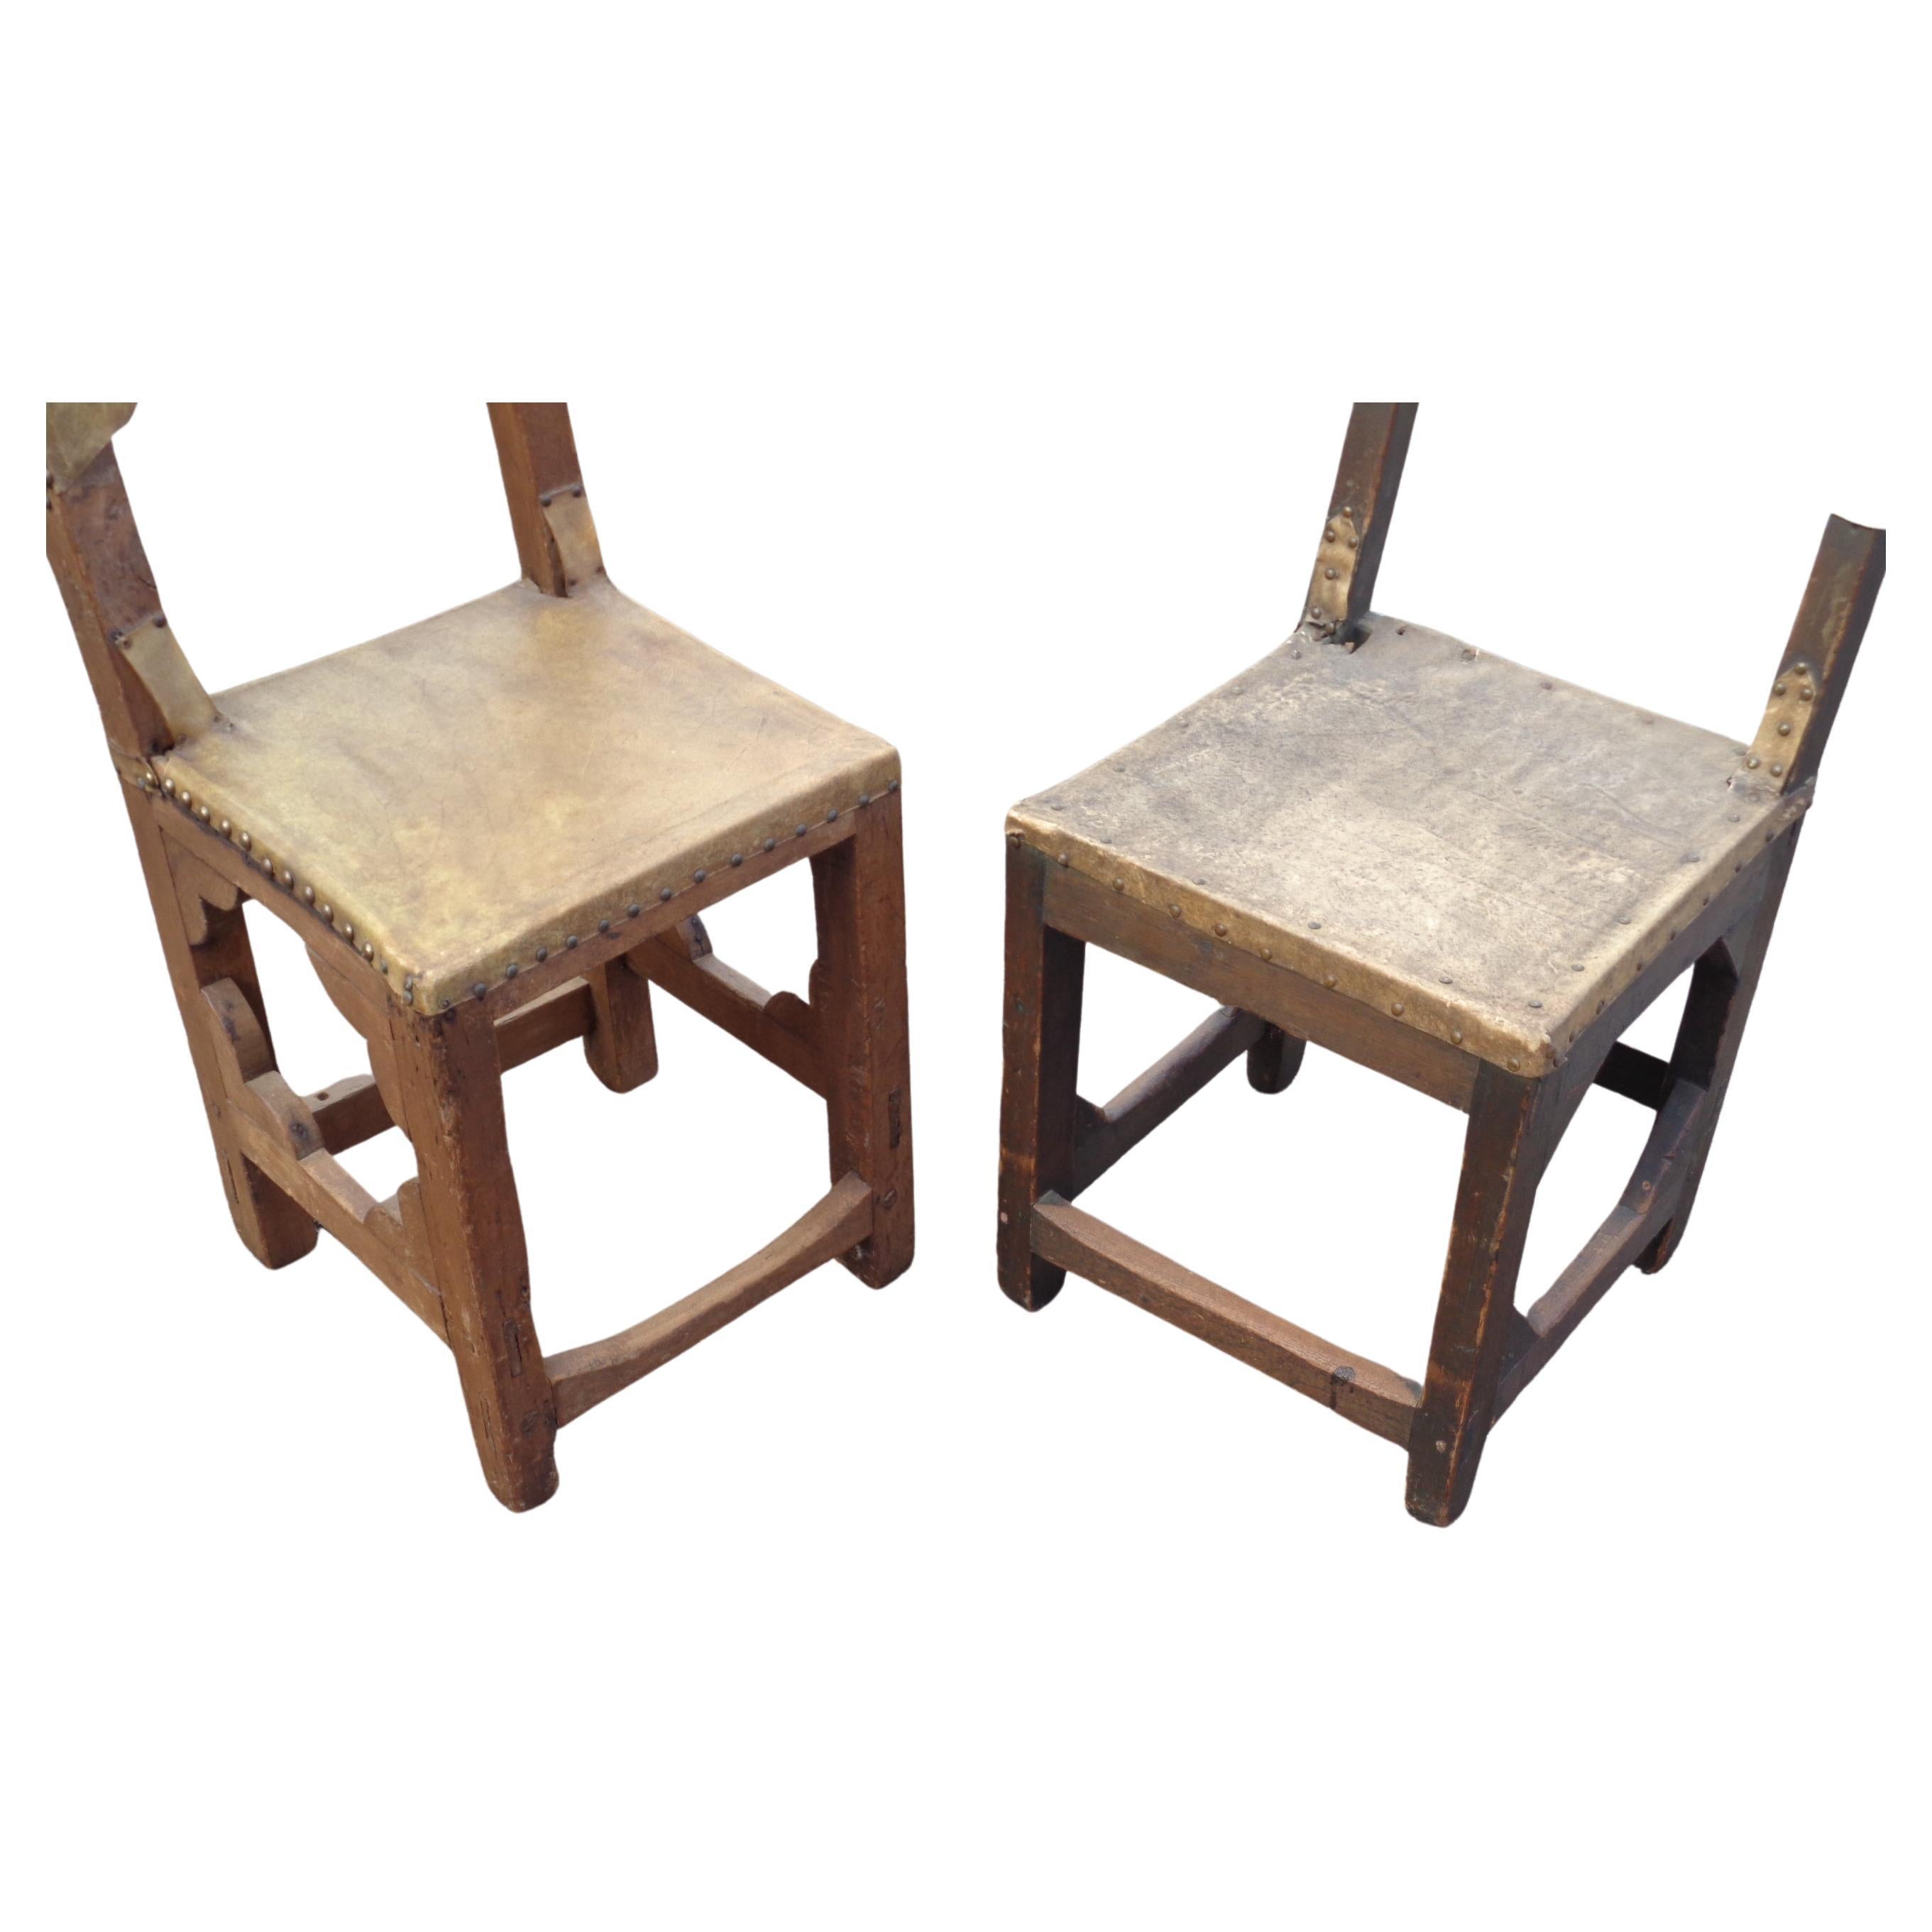 A near pair of antique rustic Spanish Colonial chairs. We think they are
 New Mexico / Mexico in origin. Hand carved early pegged and mortised joinery construction. Original brass metal tacked rare vellum hide seats and backs. One chair is hand